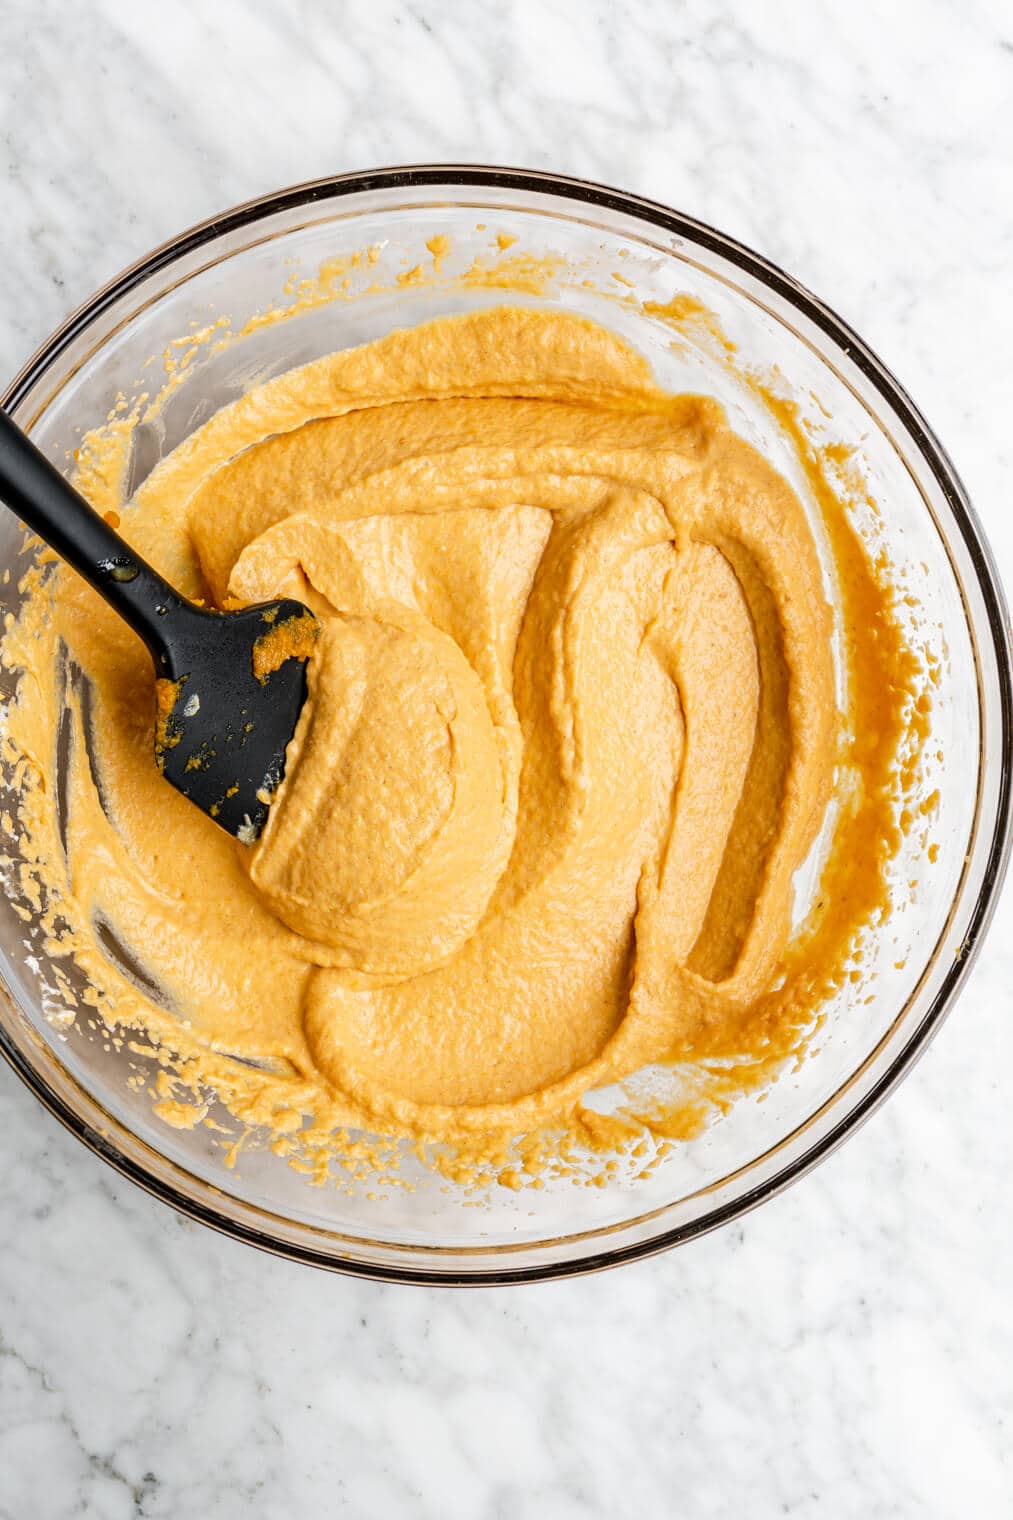 Pumpkin mousse ingredients smoothed in a glass mixing bowl with a black spatula.